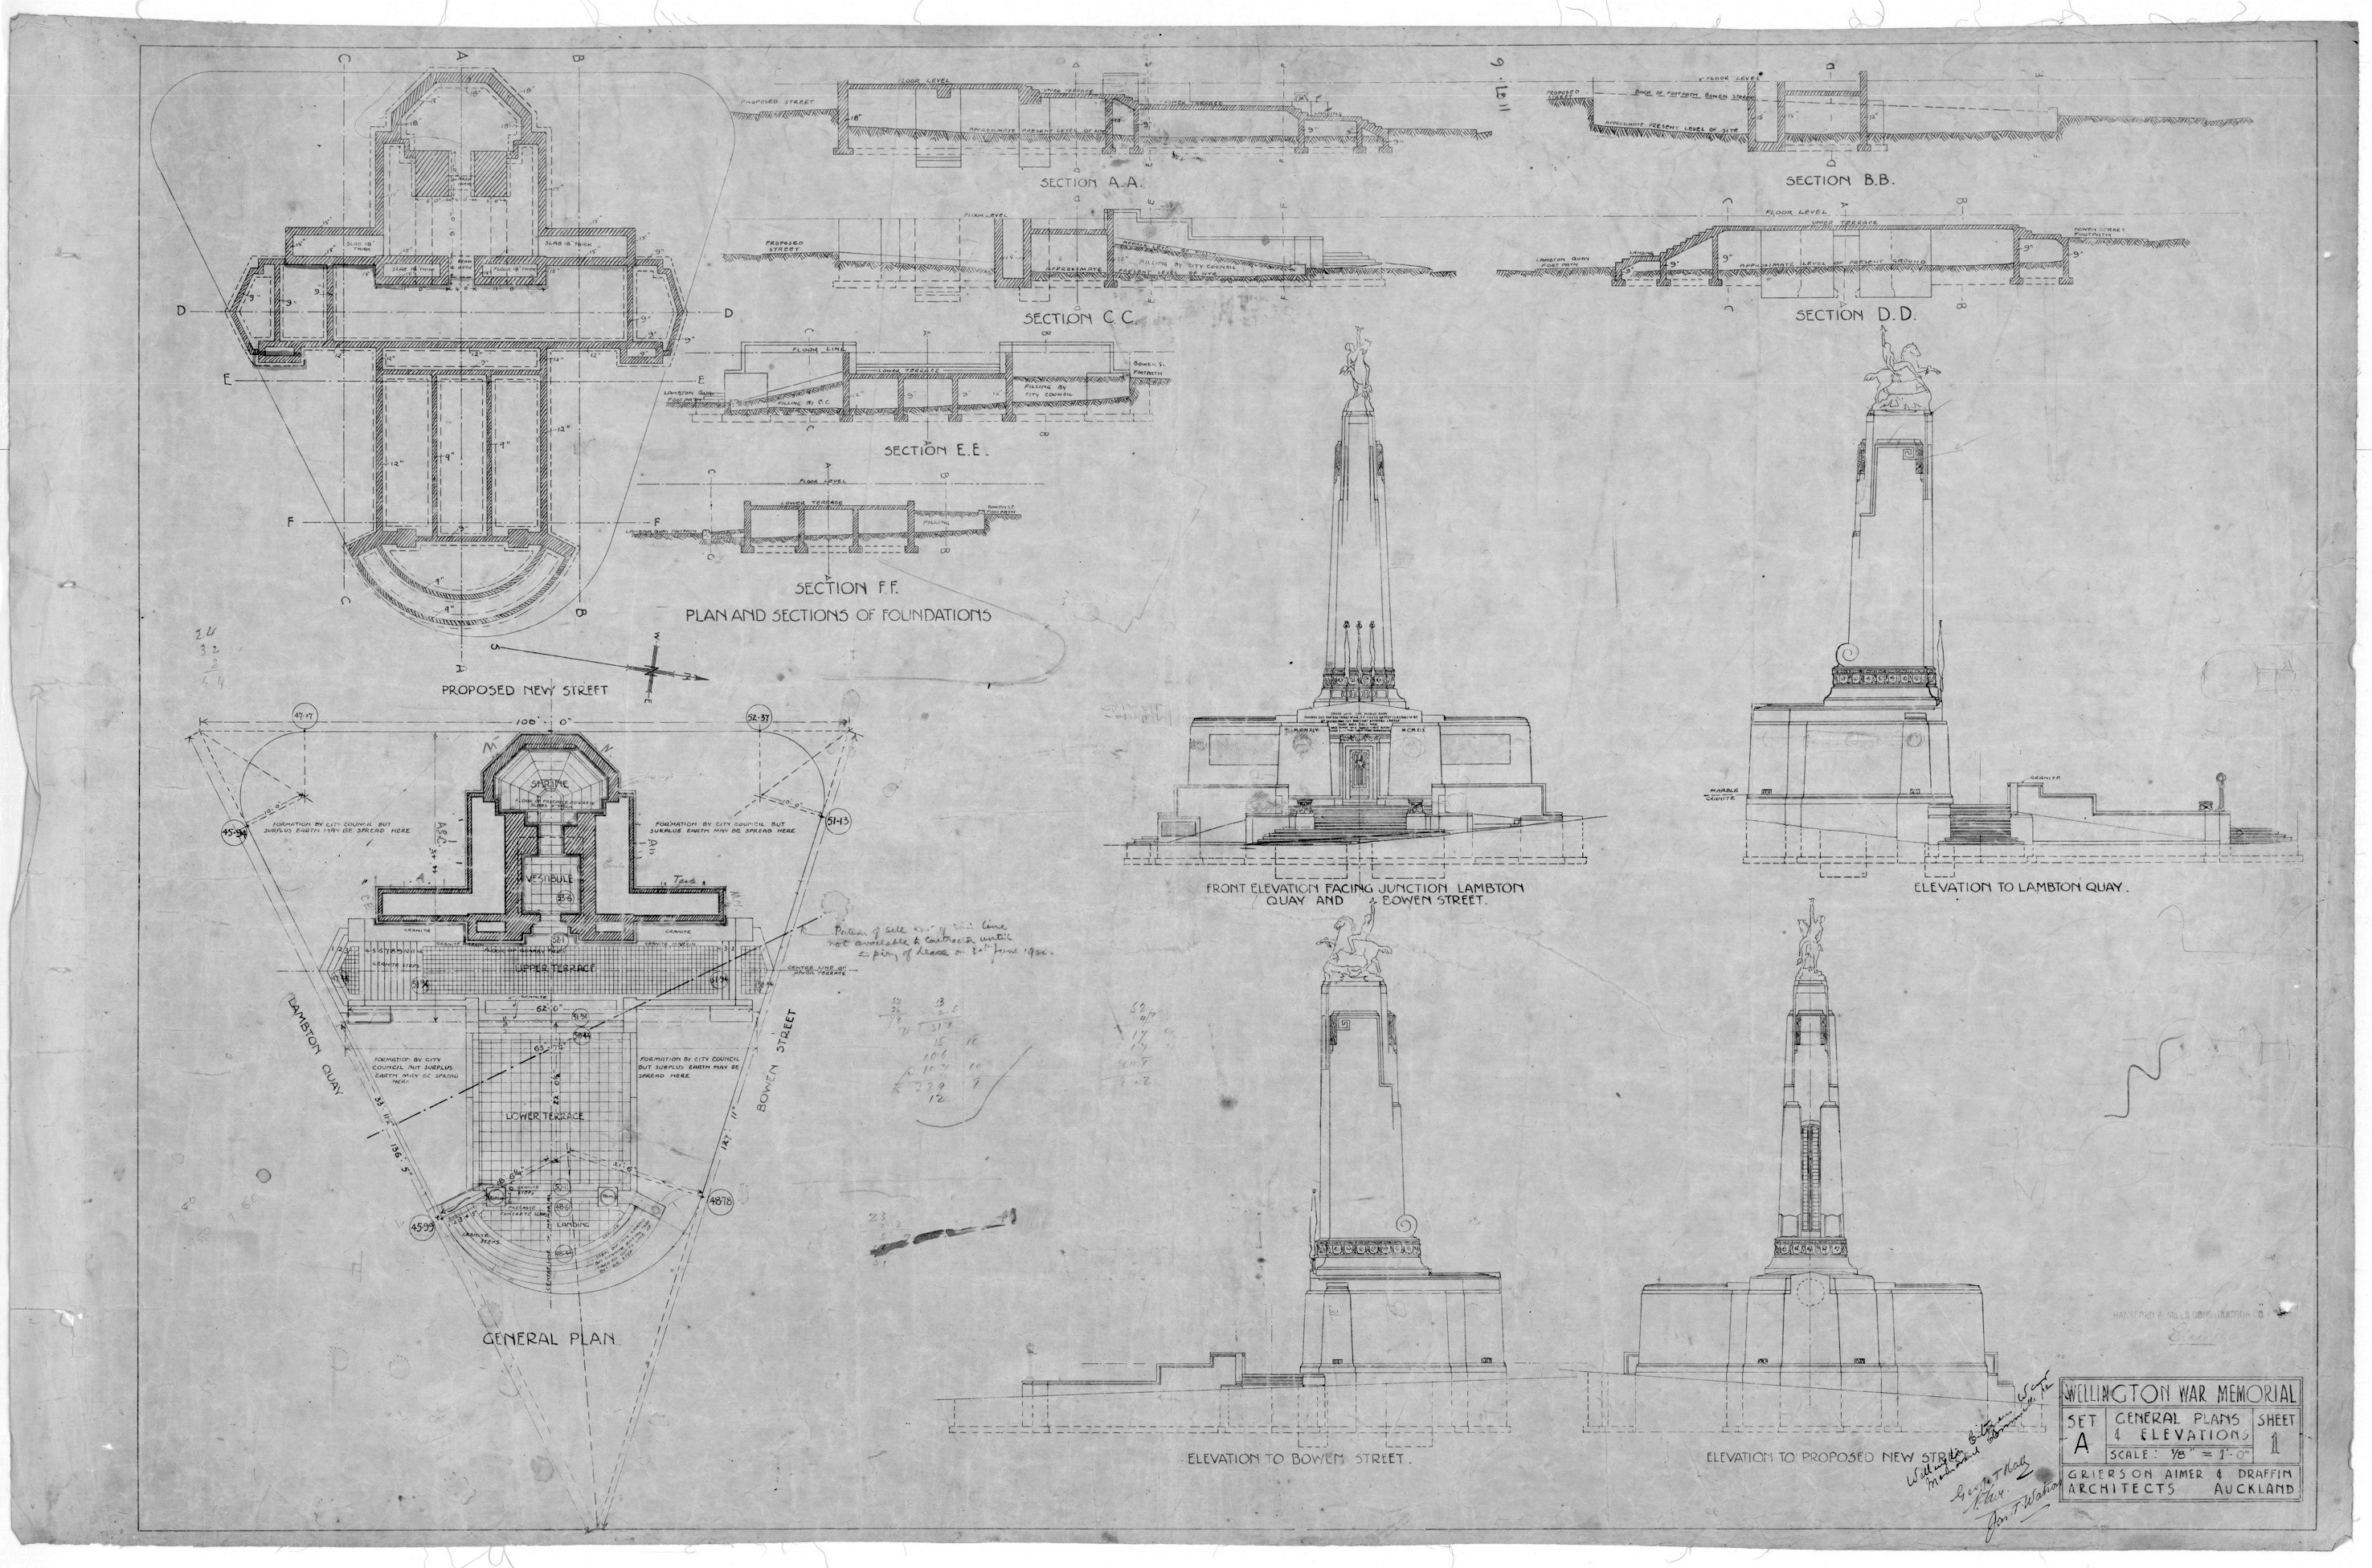 Original drawings. Image: WCC Archives